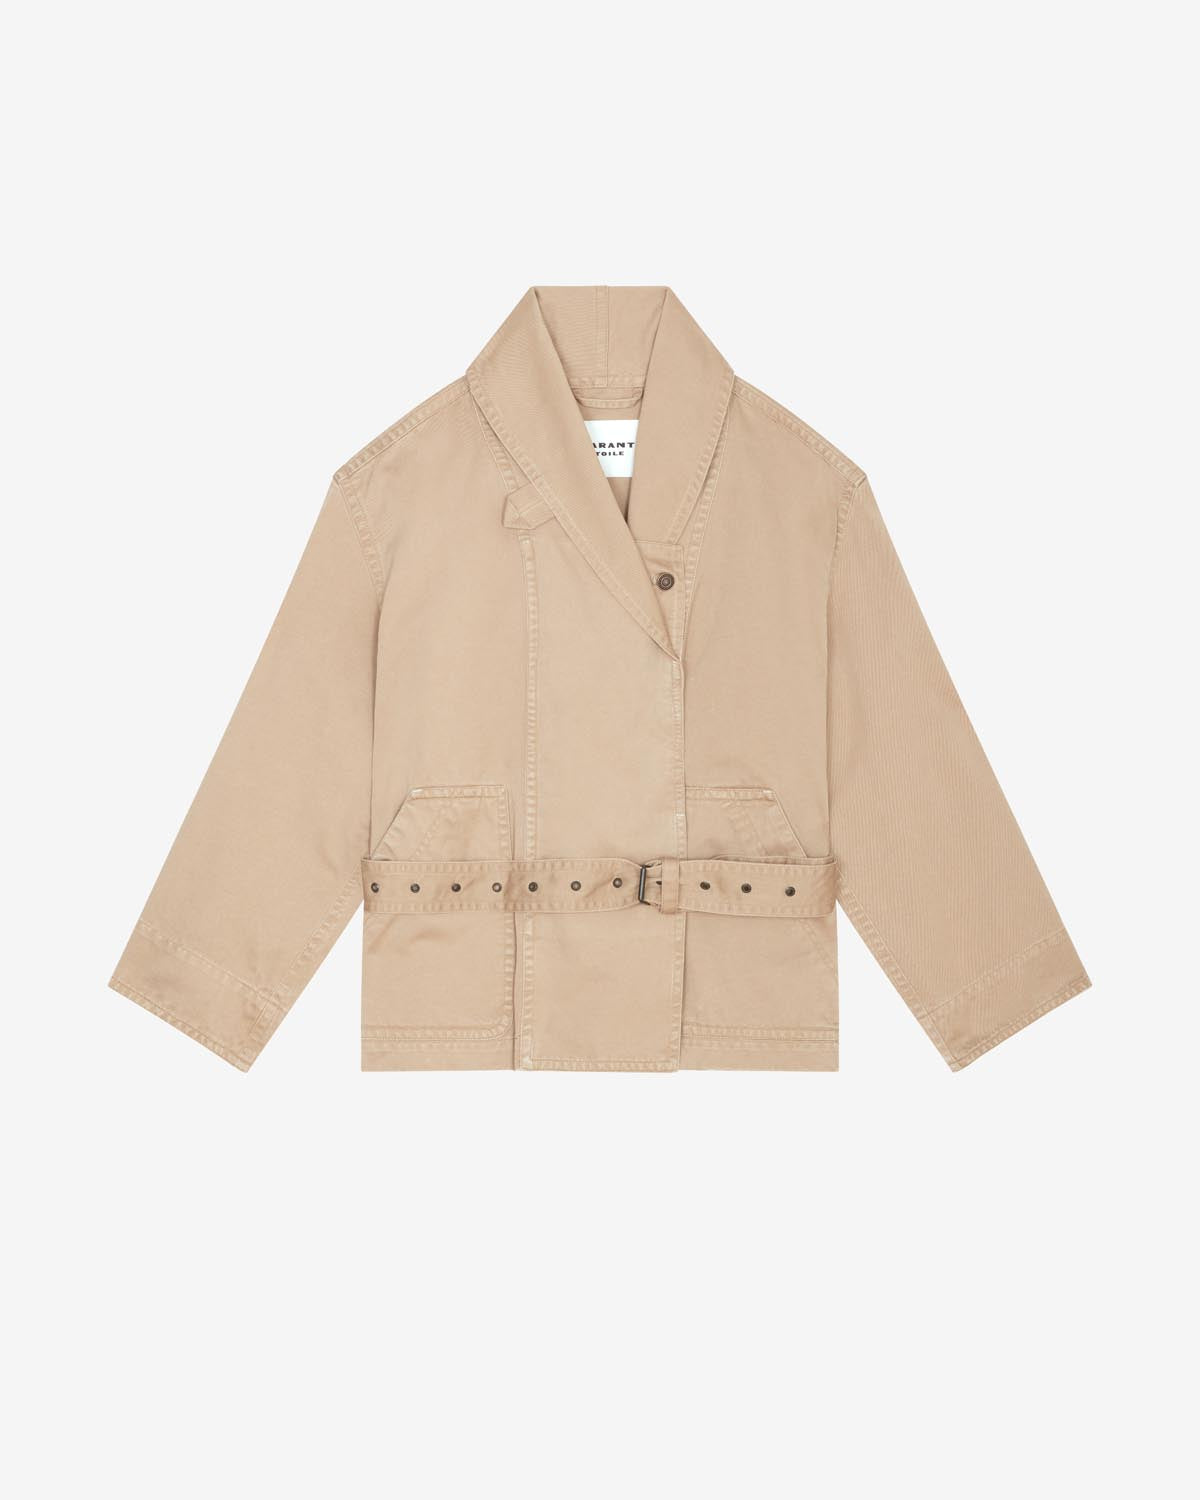 Coats and Jackets Etoile Woman | ISABEL MARANT Official